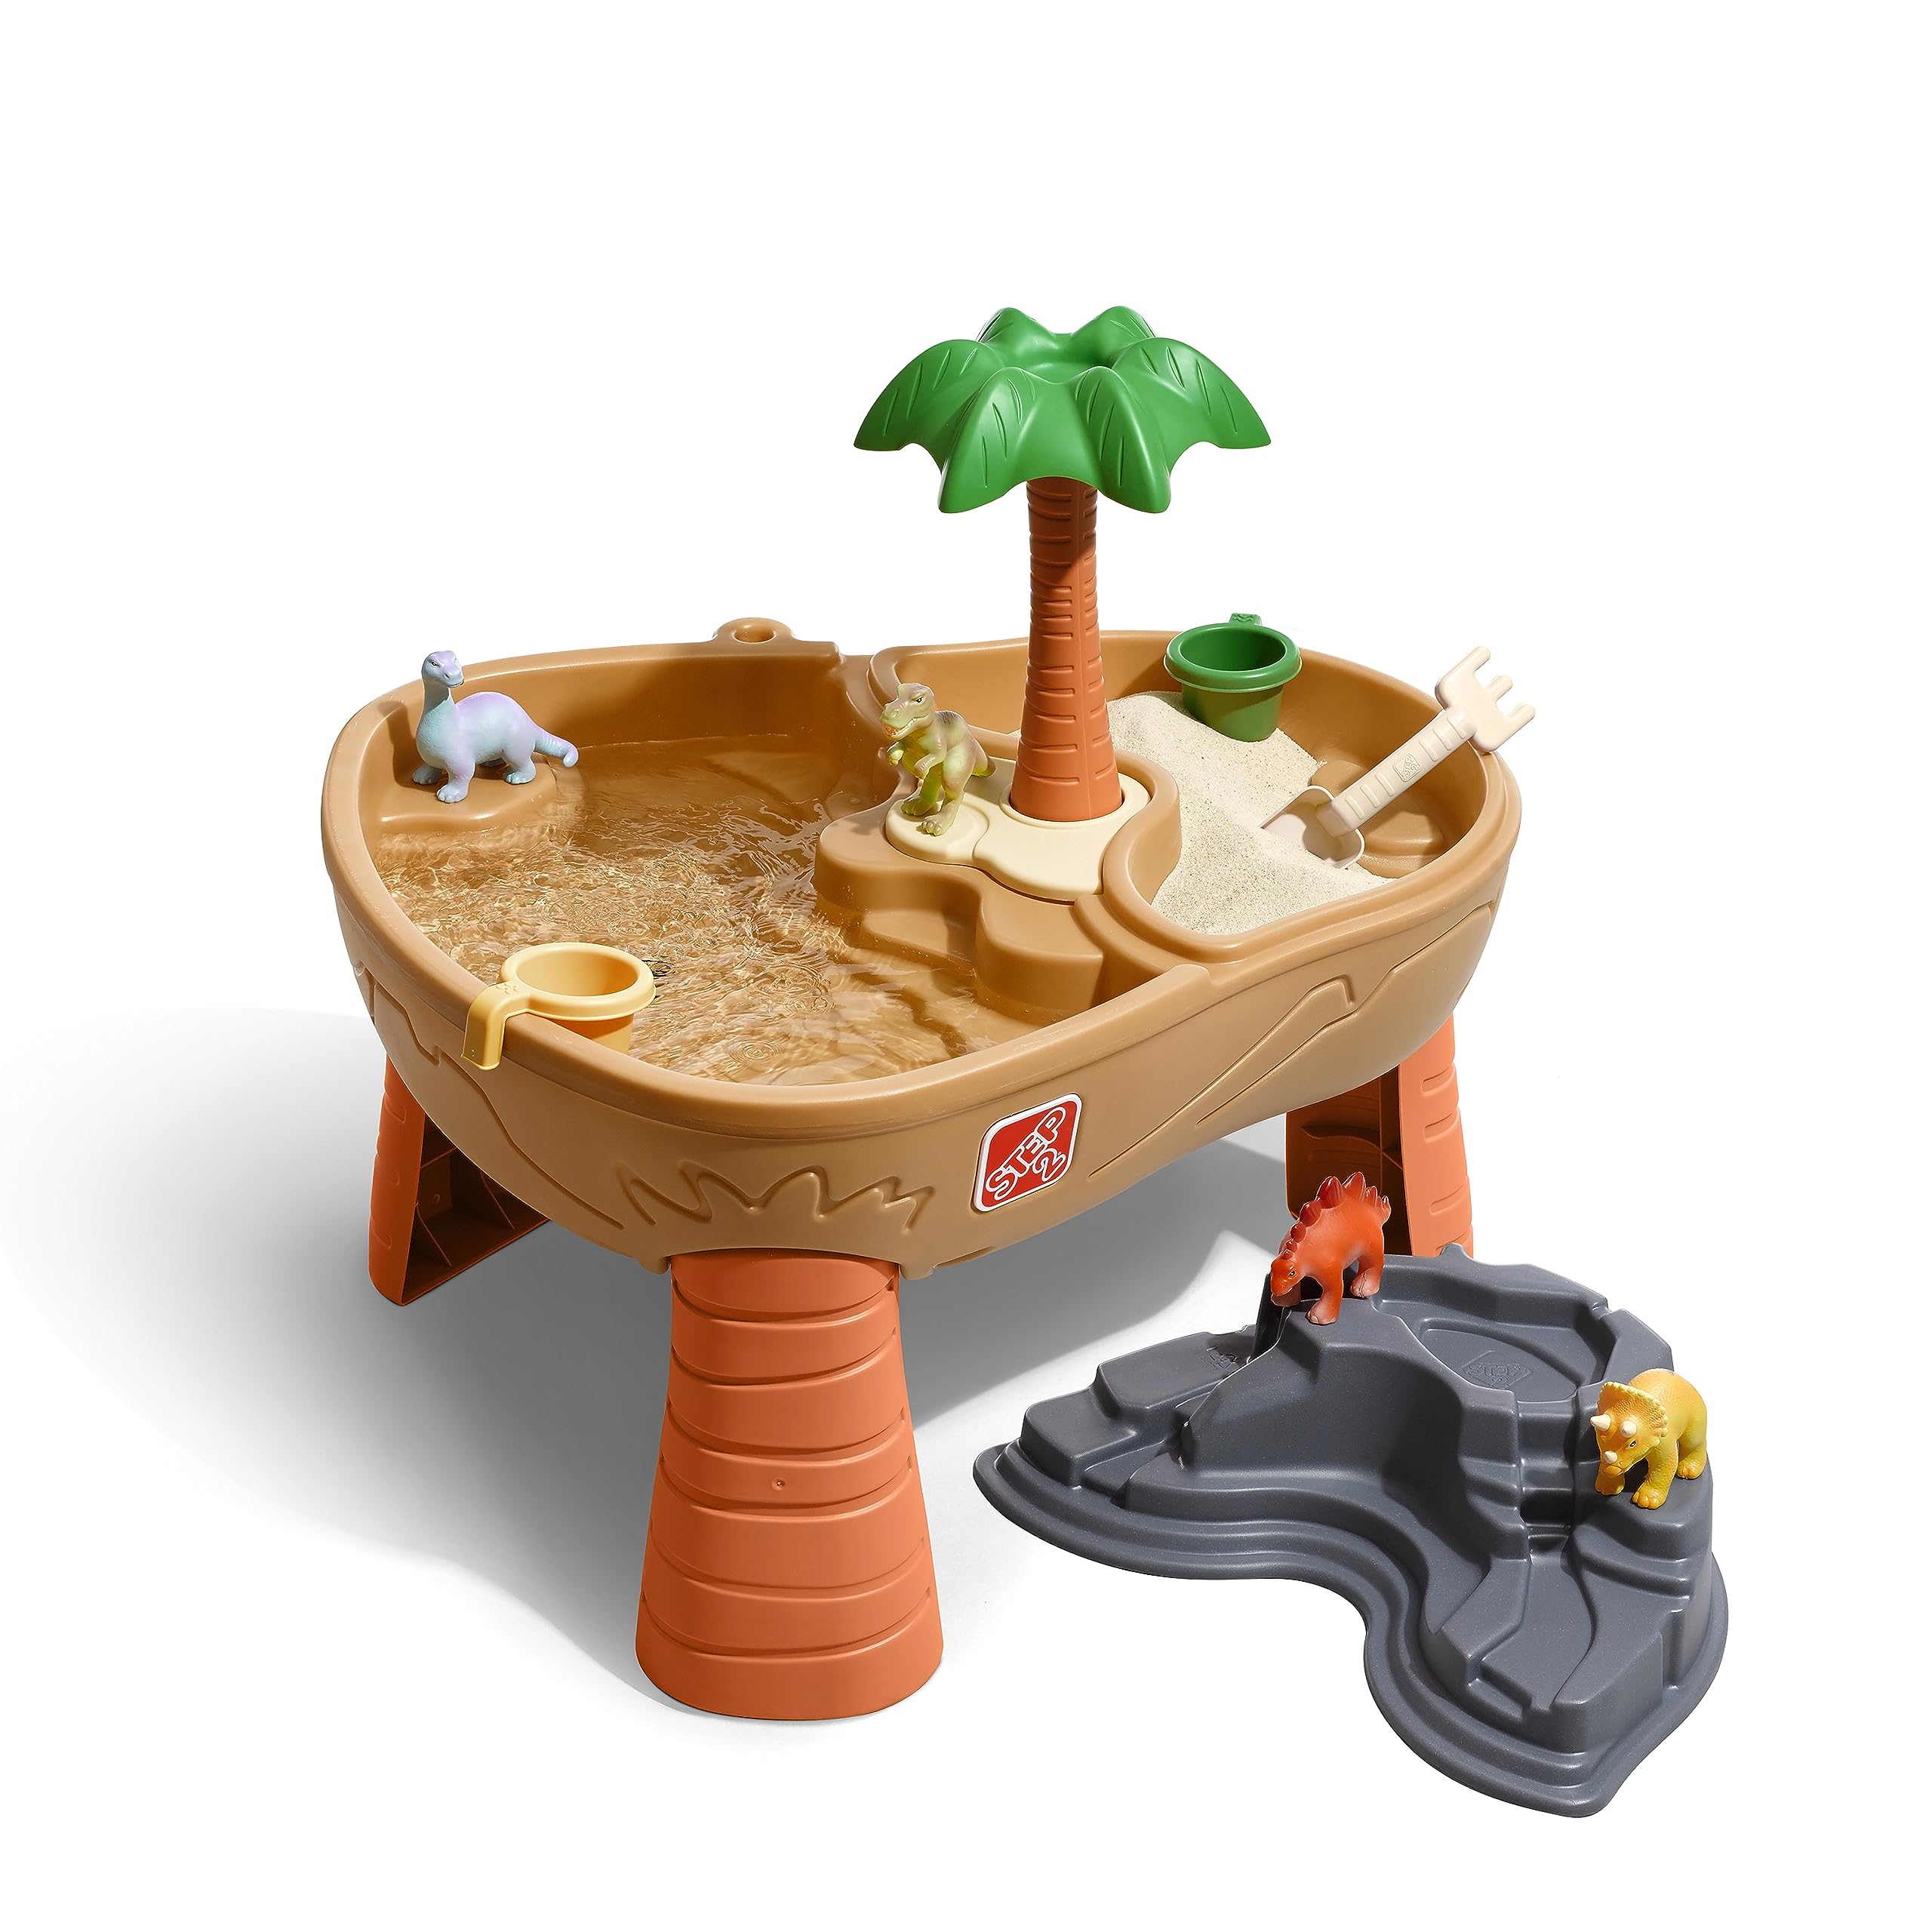 Step2 Dino Dig Sand & Water Table, 24 months to 60 months, Includes dino table, dino figures, accessories